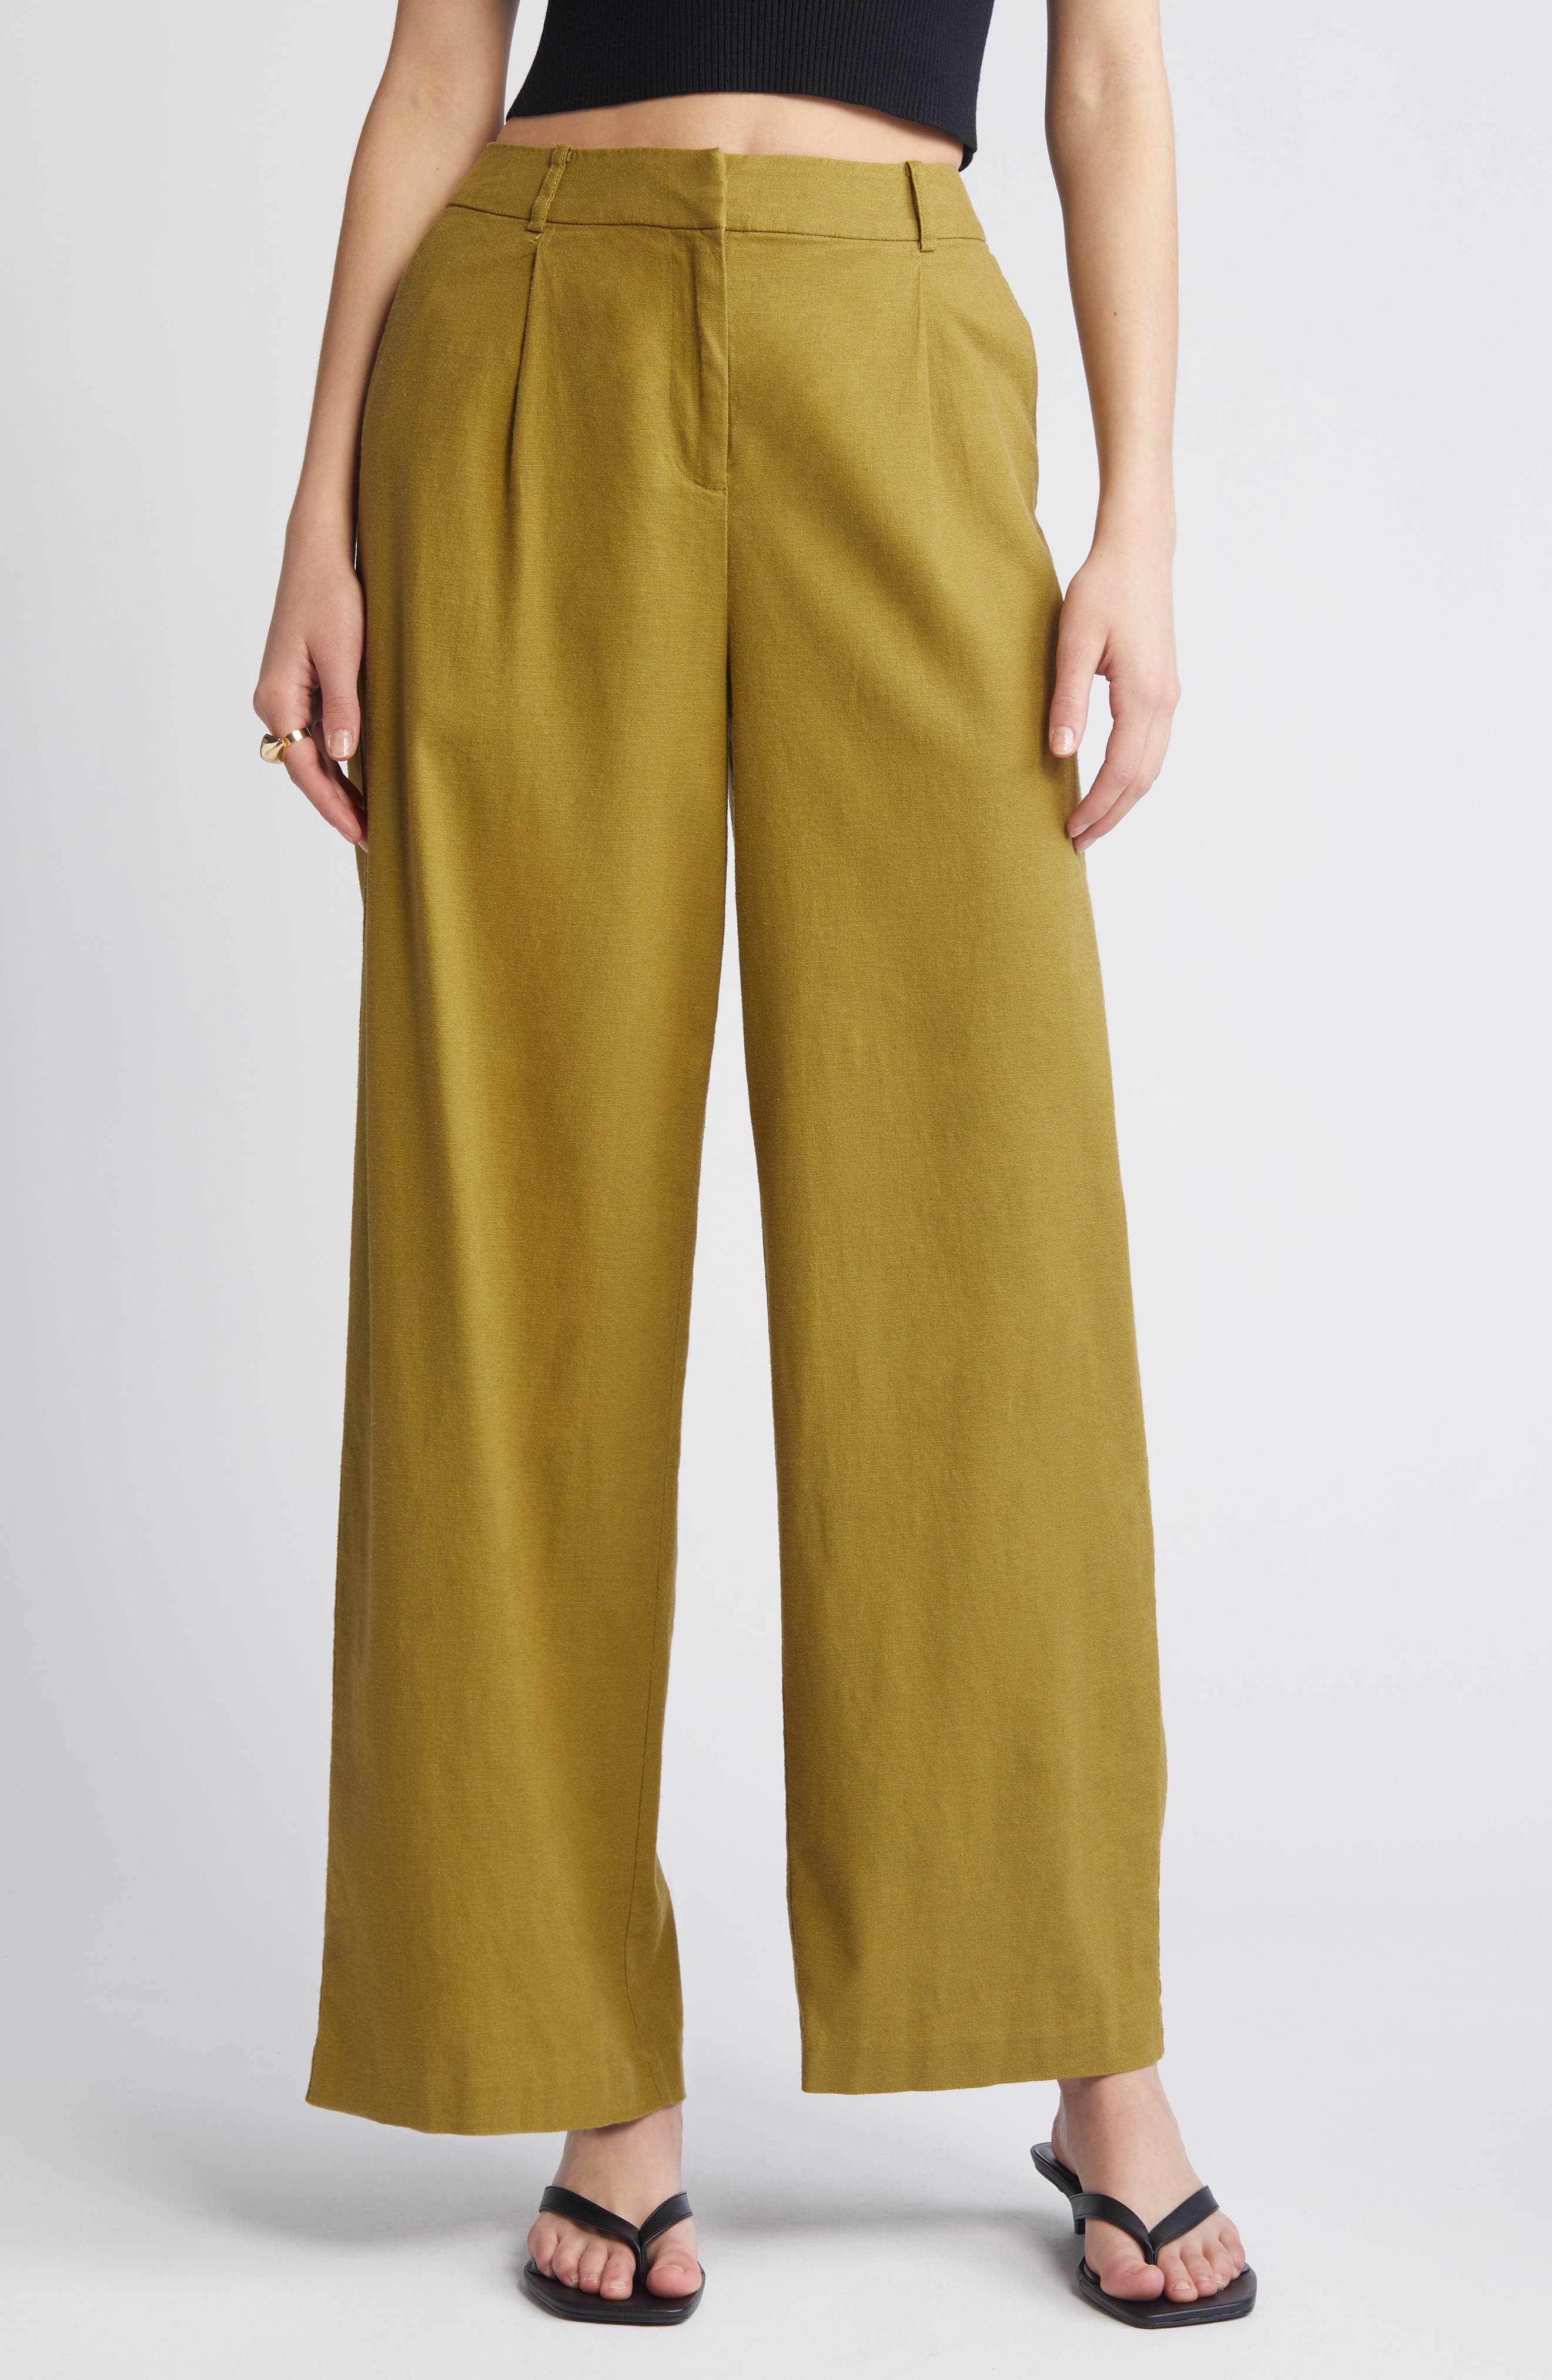 UNDERCOVER textured high-waisted trousers - Yellow